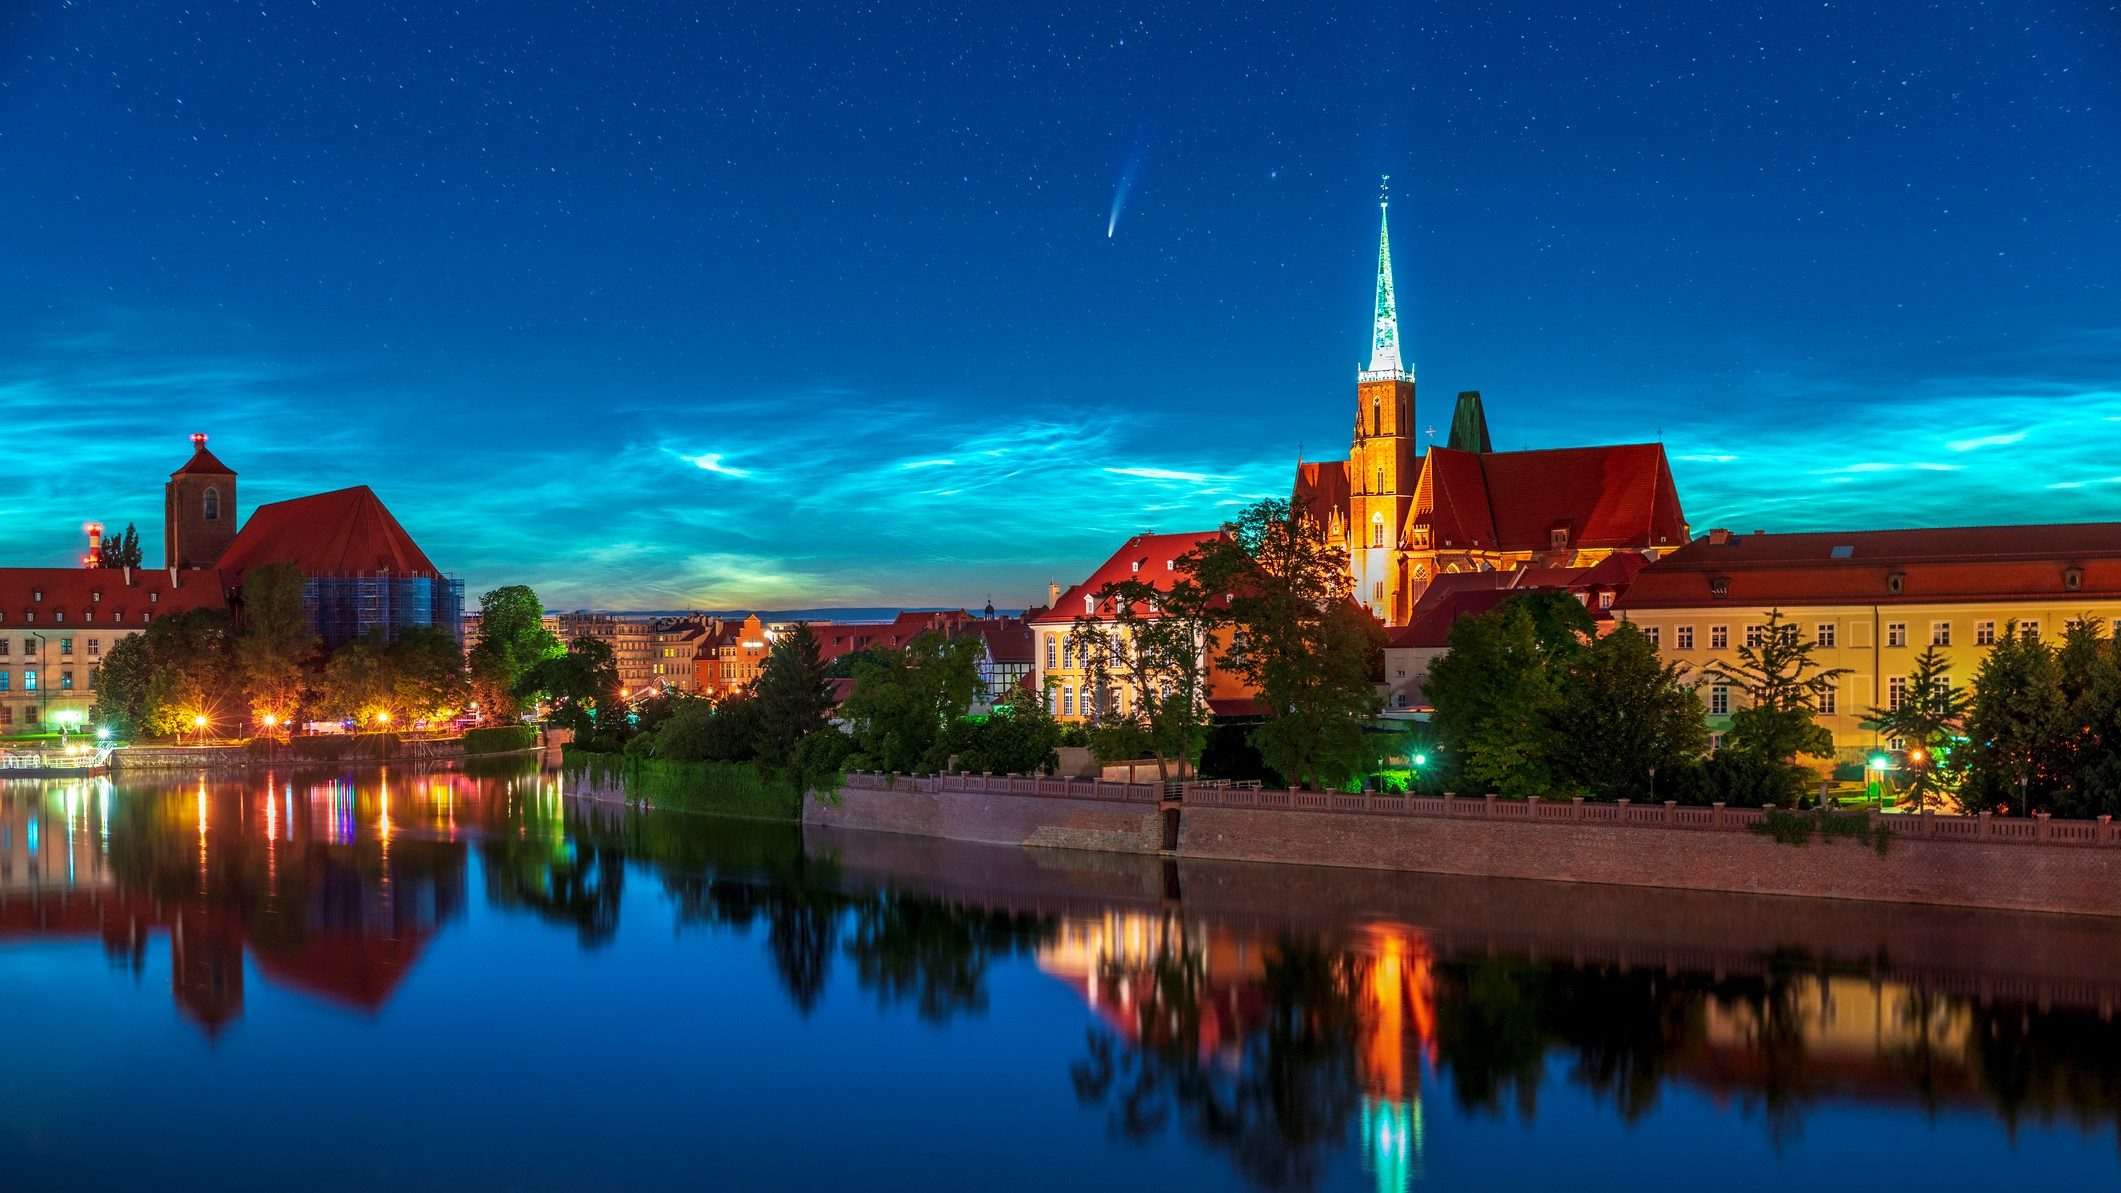 Wispy white clouds shine at twilight, comet NEOWISE streaks across the sky.  A church and trees are reflected in the water below.